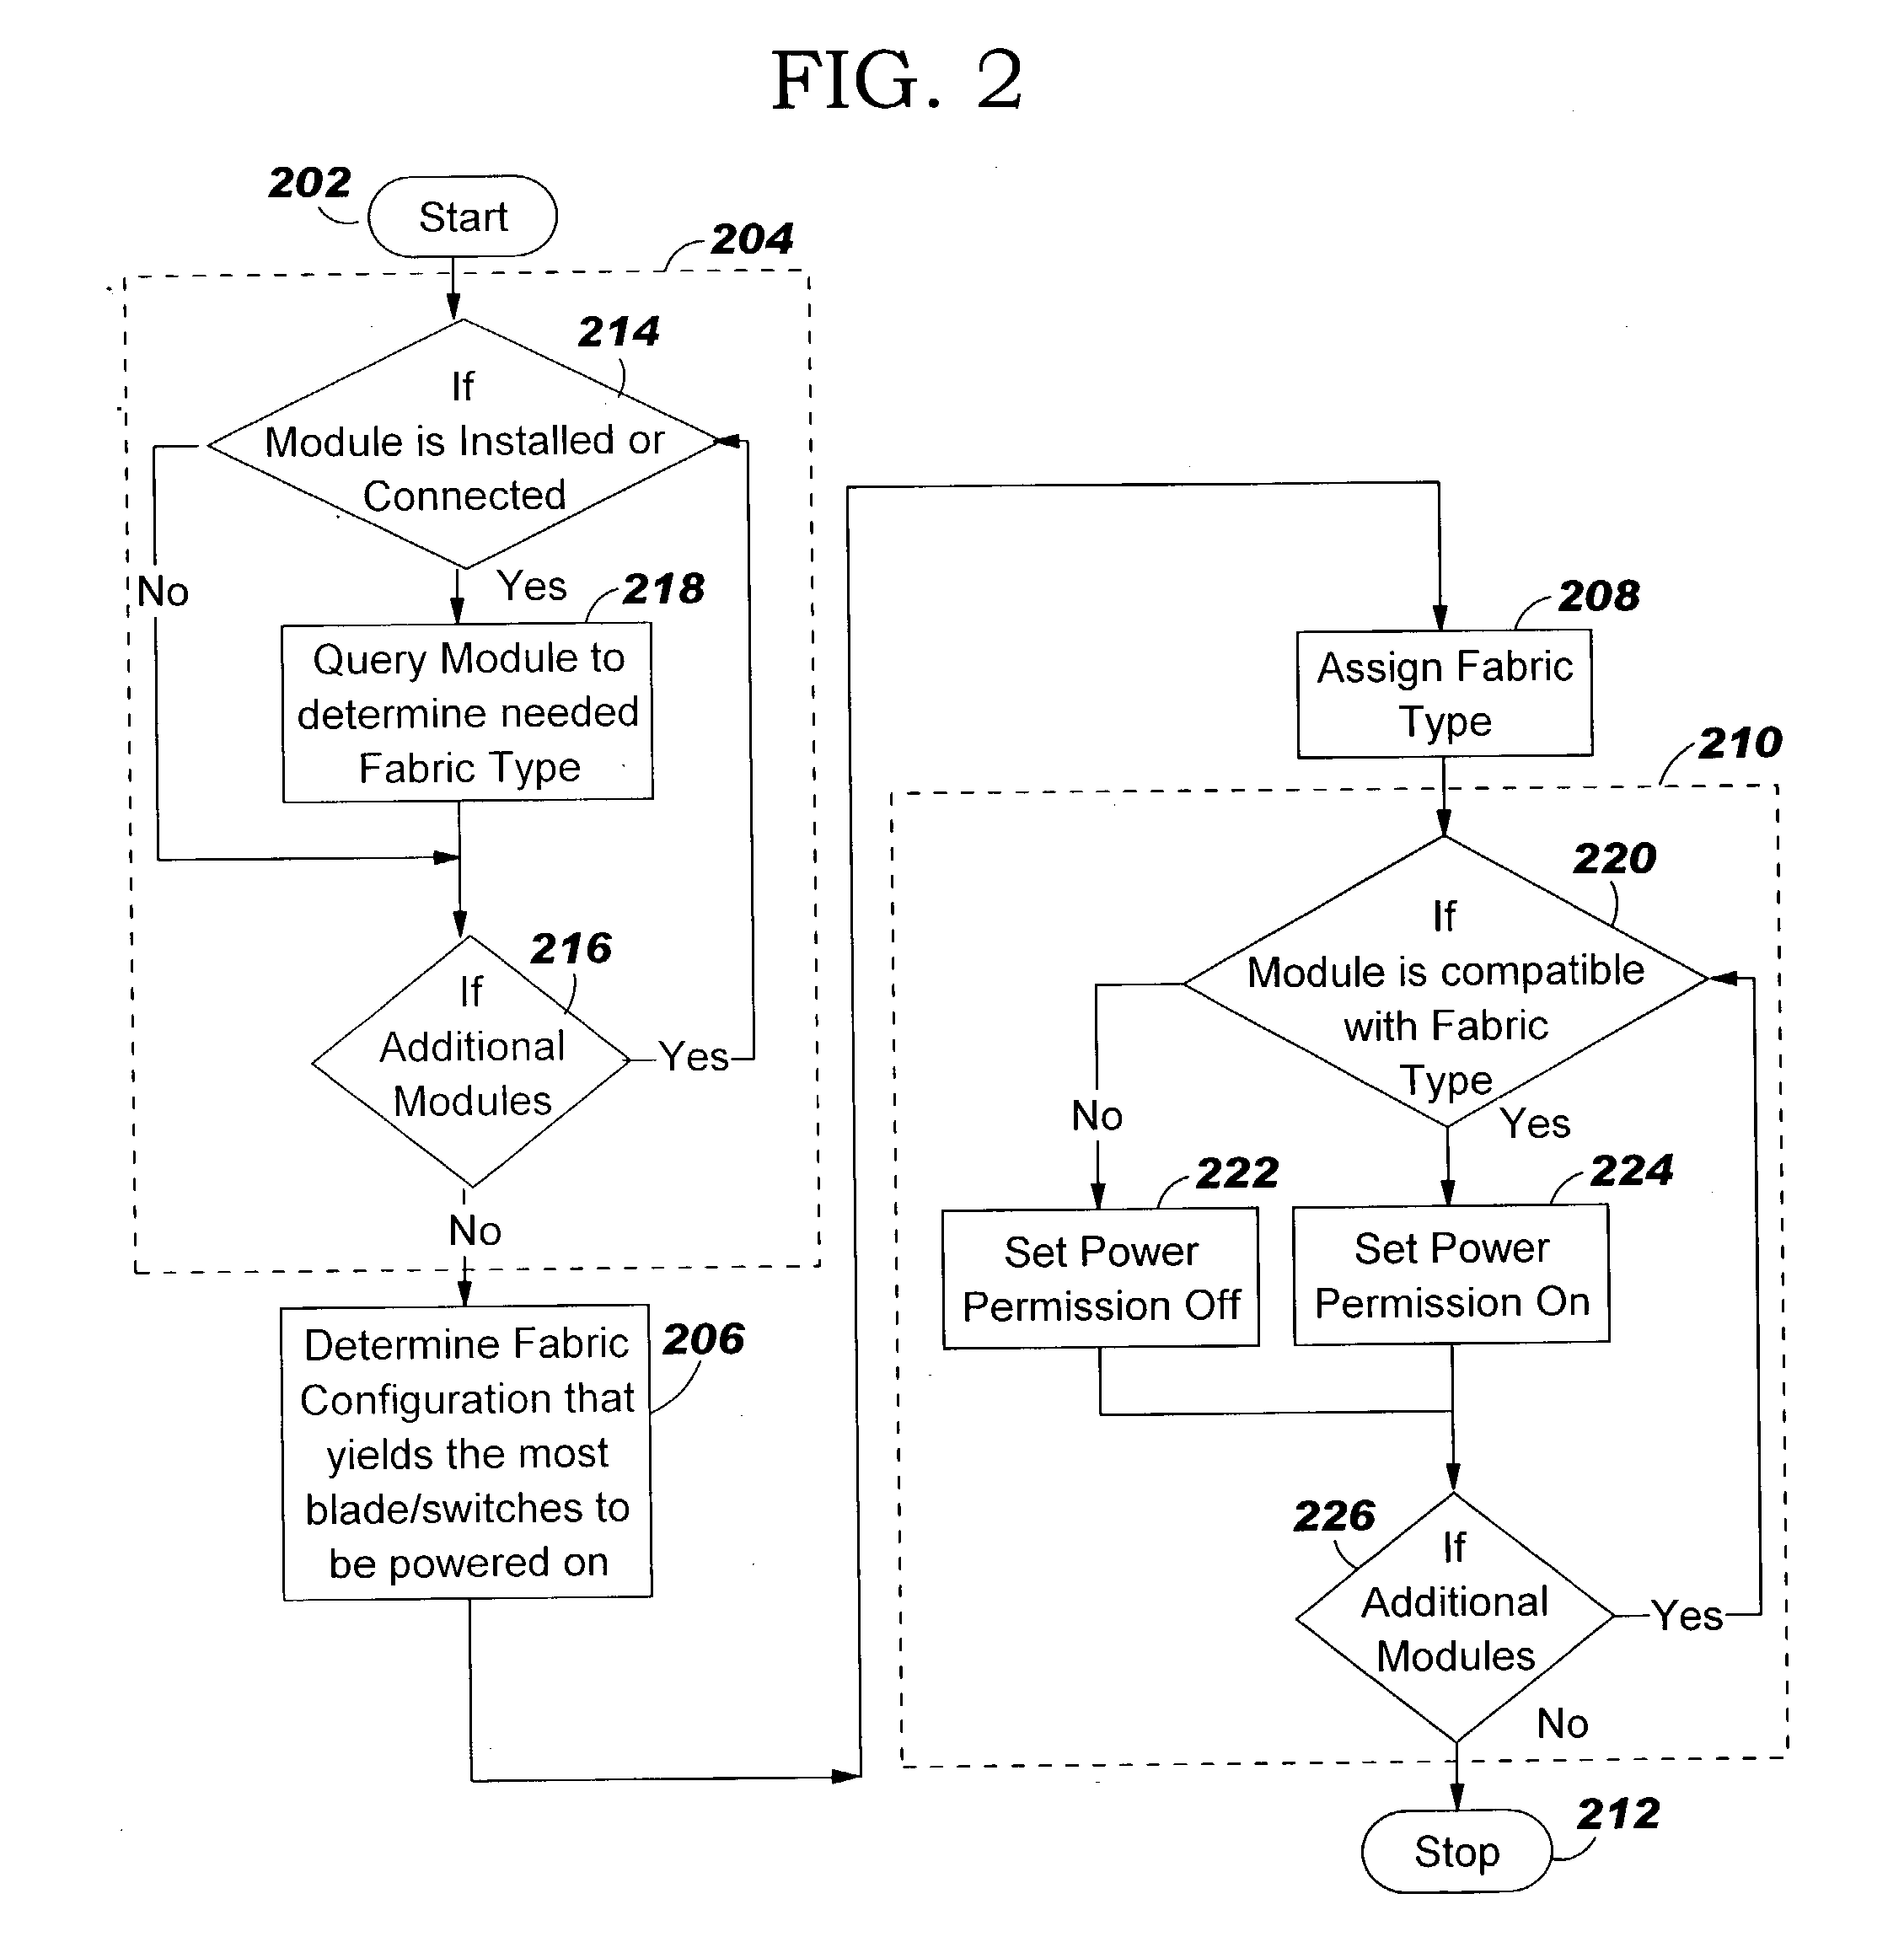 Apparatus, method and program product for automatically distributing power to modules inserted in live chassis